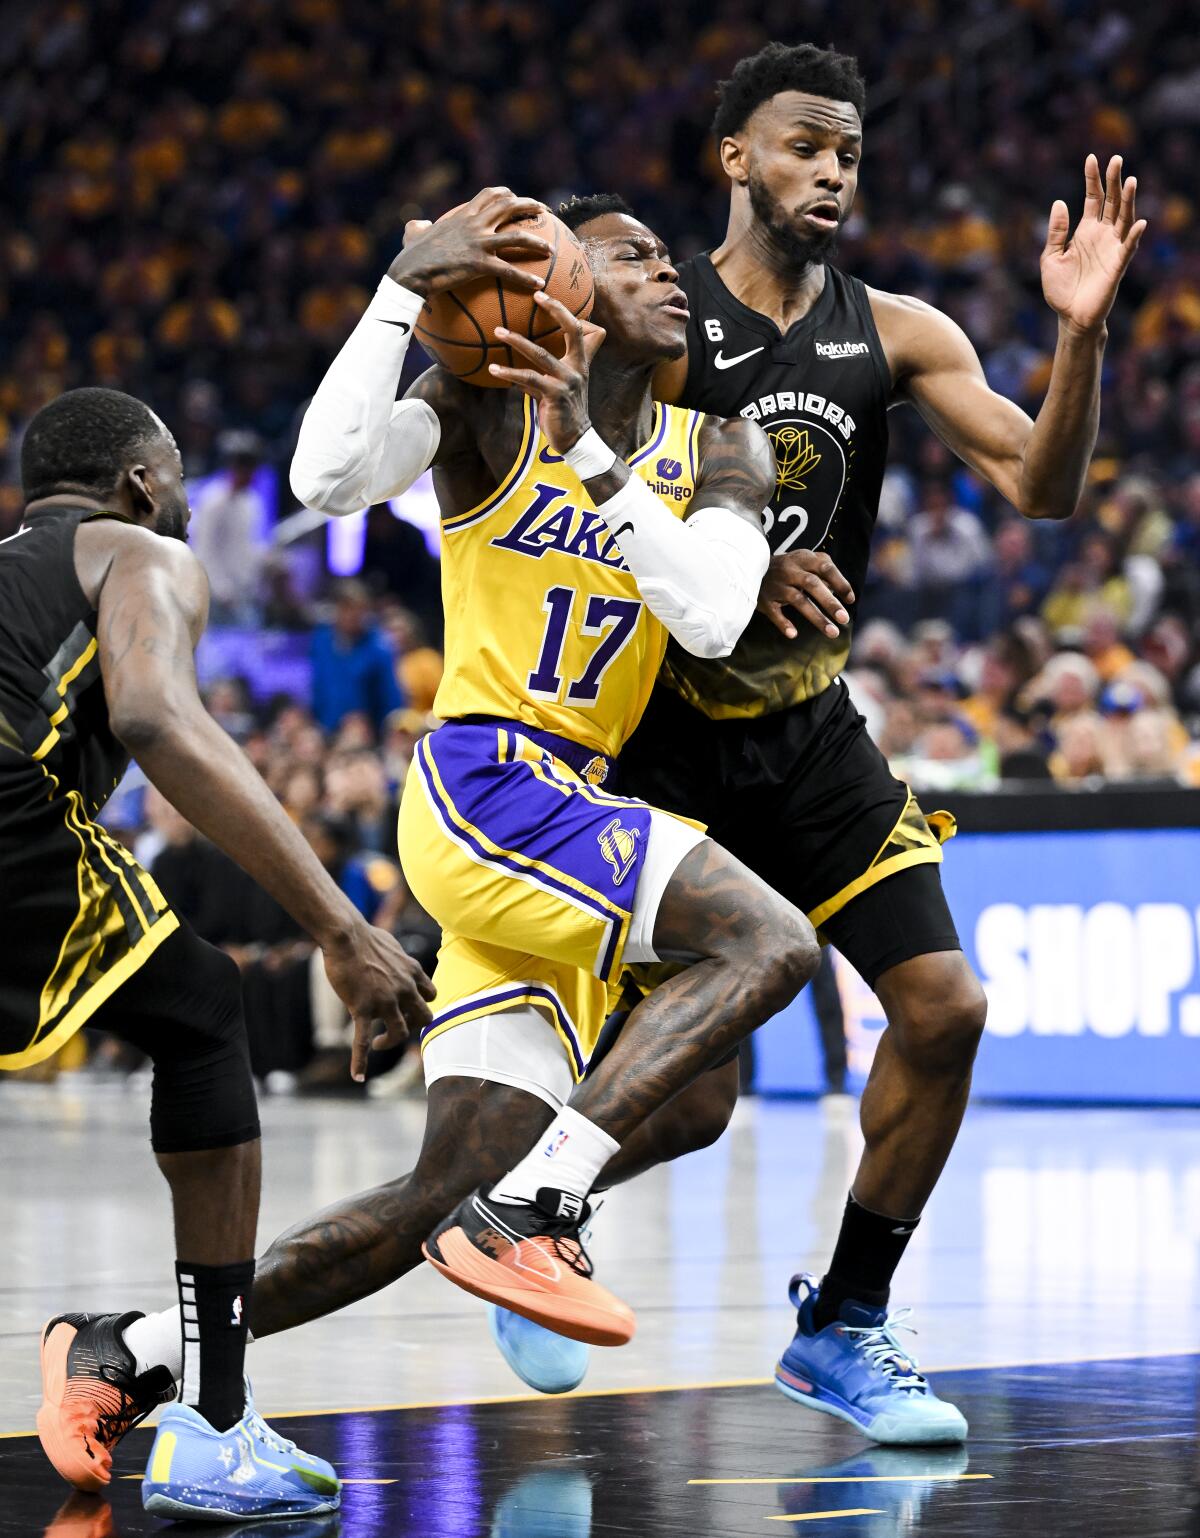 Lakers guard Dennis Schroder drives down the lane against Warriors forwards Draymond Green, left, and Andrew Wiggins.